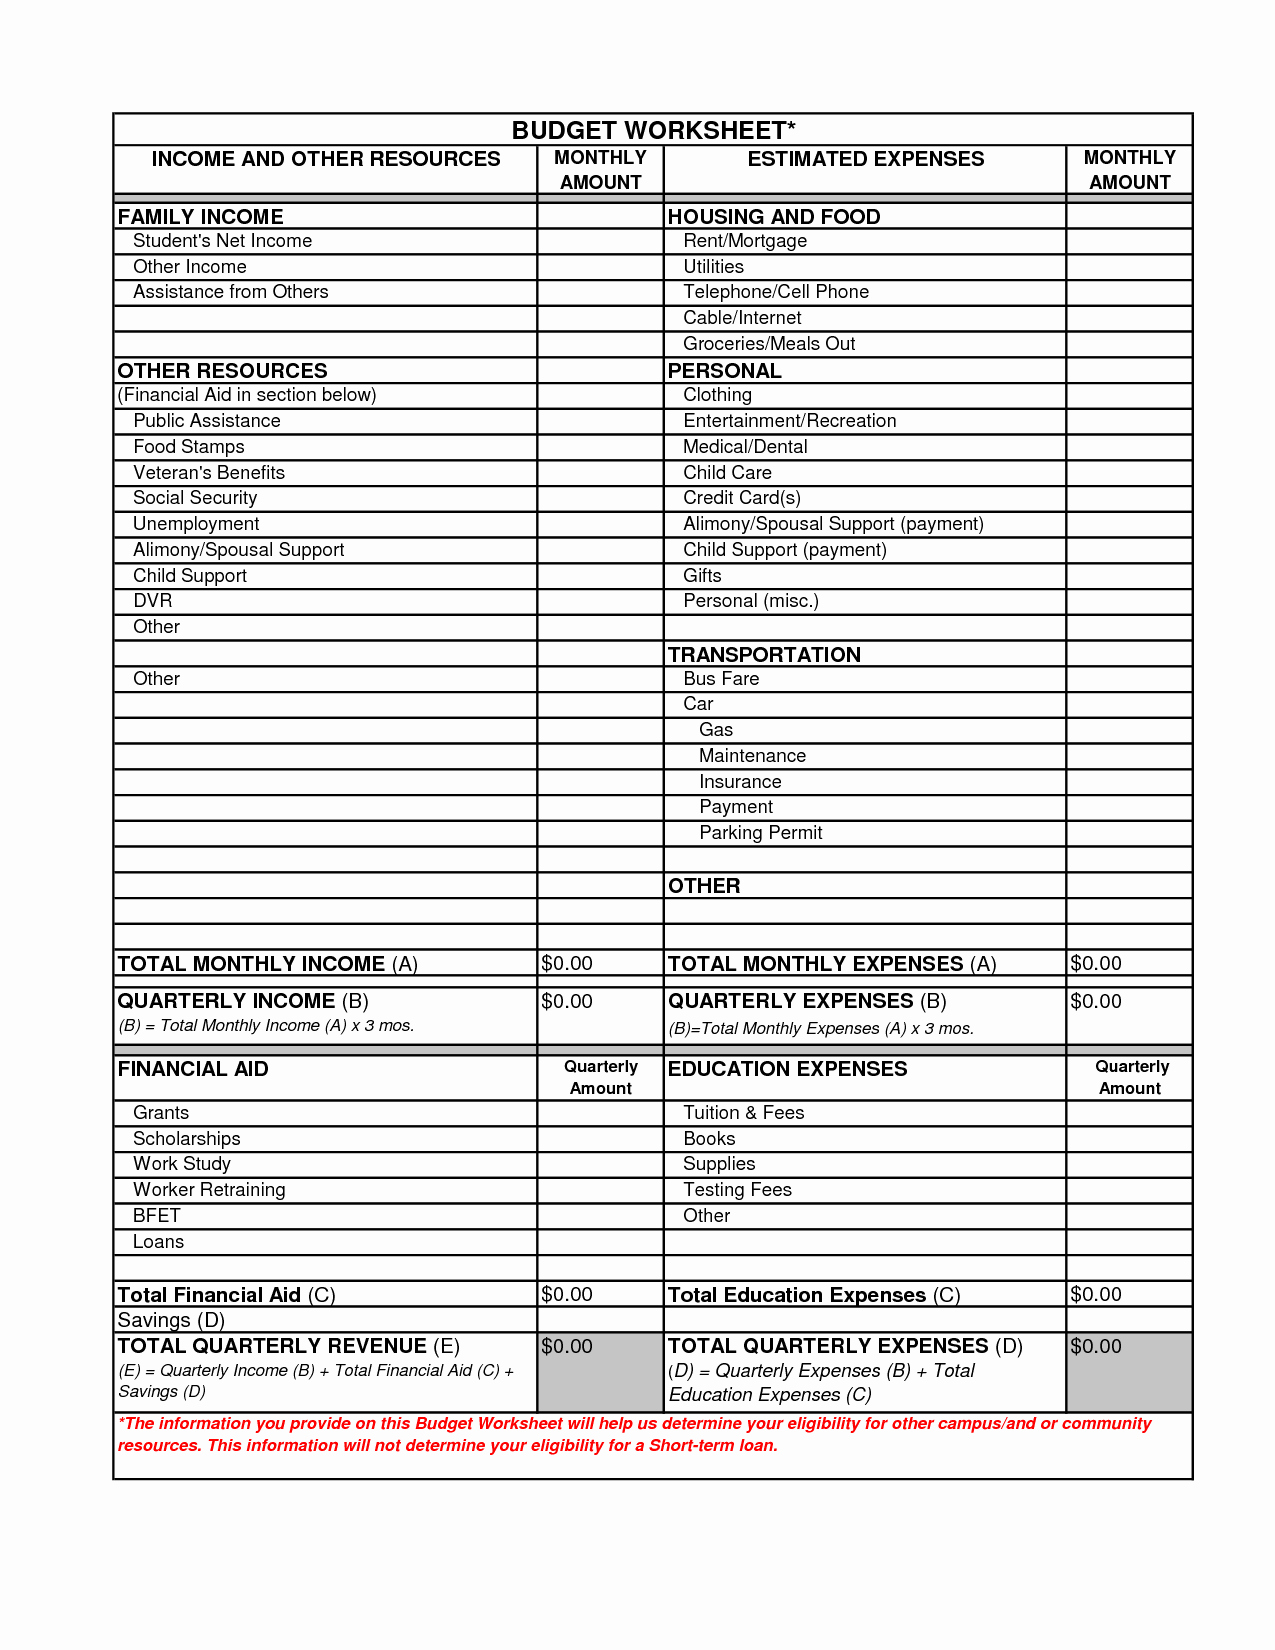 Income and Expense Worksheet Template Luxury 18 Best Of Printable Monthly Spending Worksheet